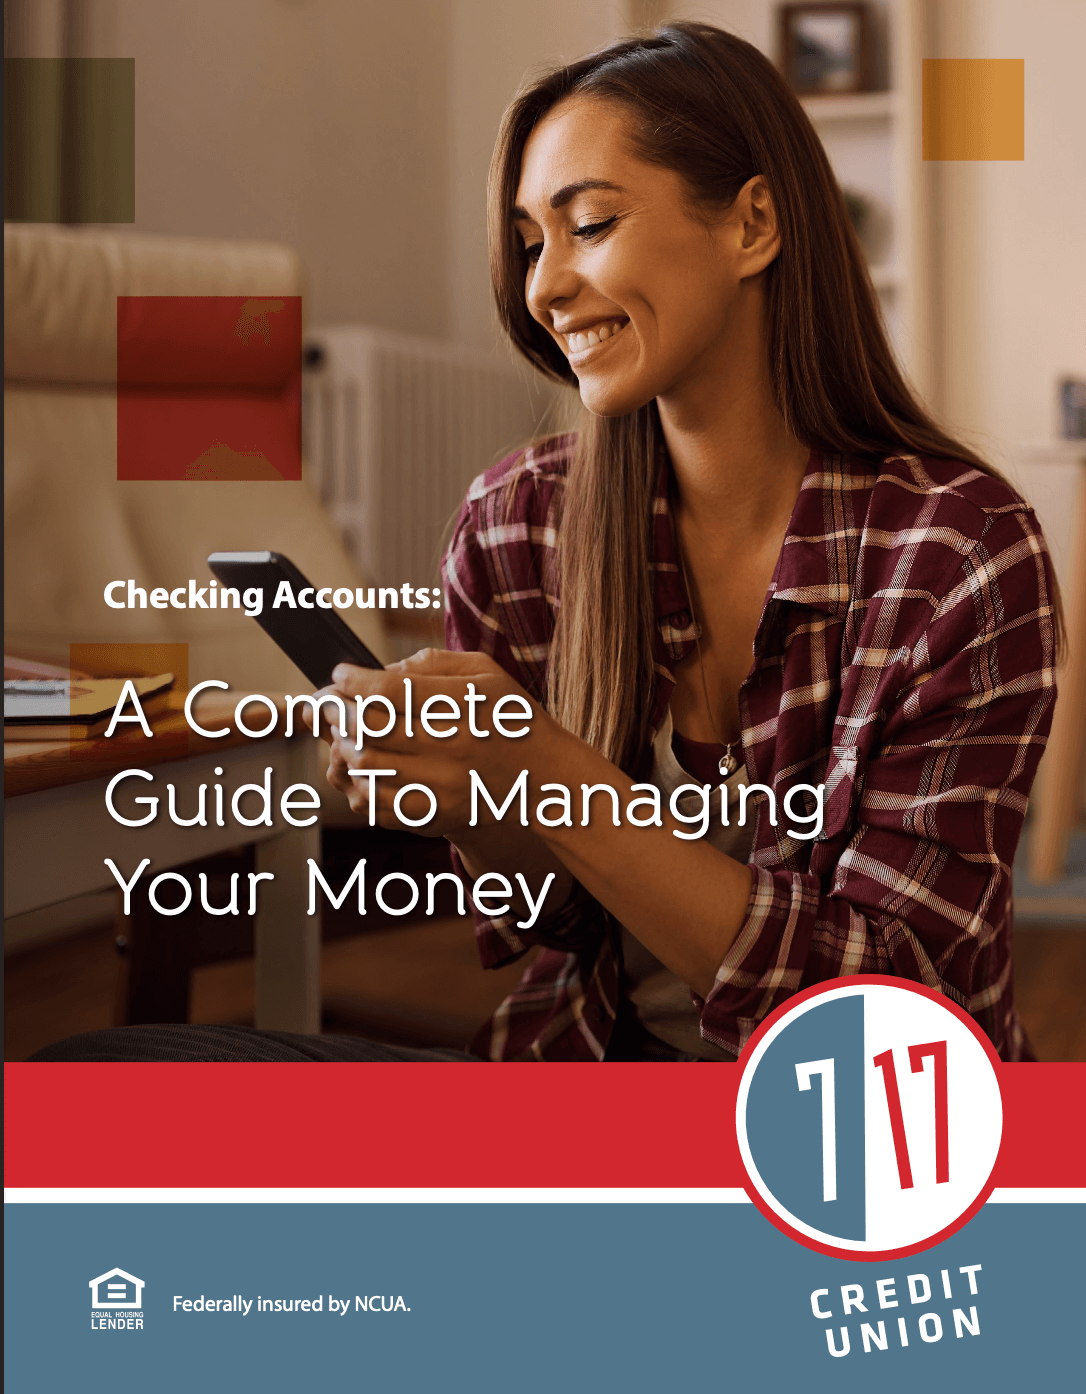 Guide cover for Checking Accounts: A Complete Guide to Managing Your Money